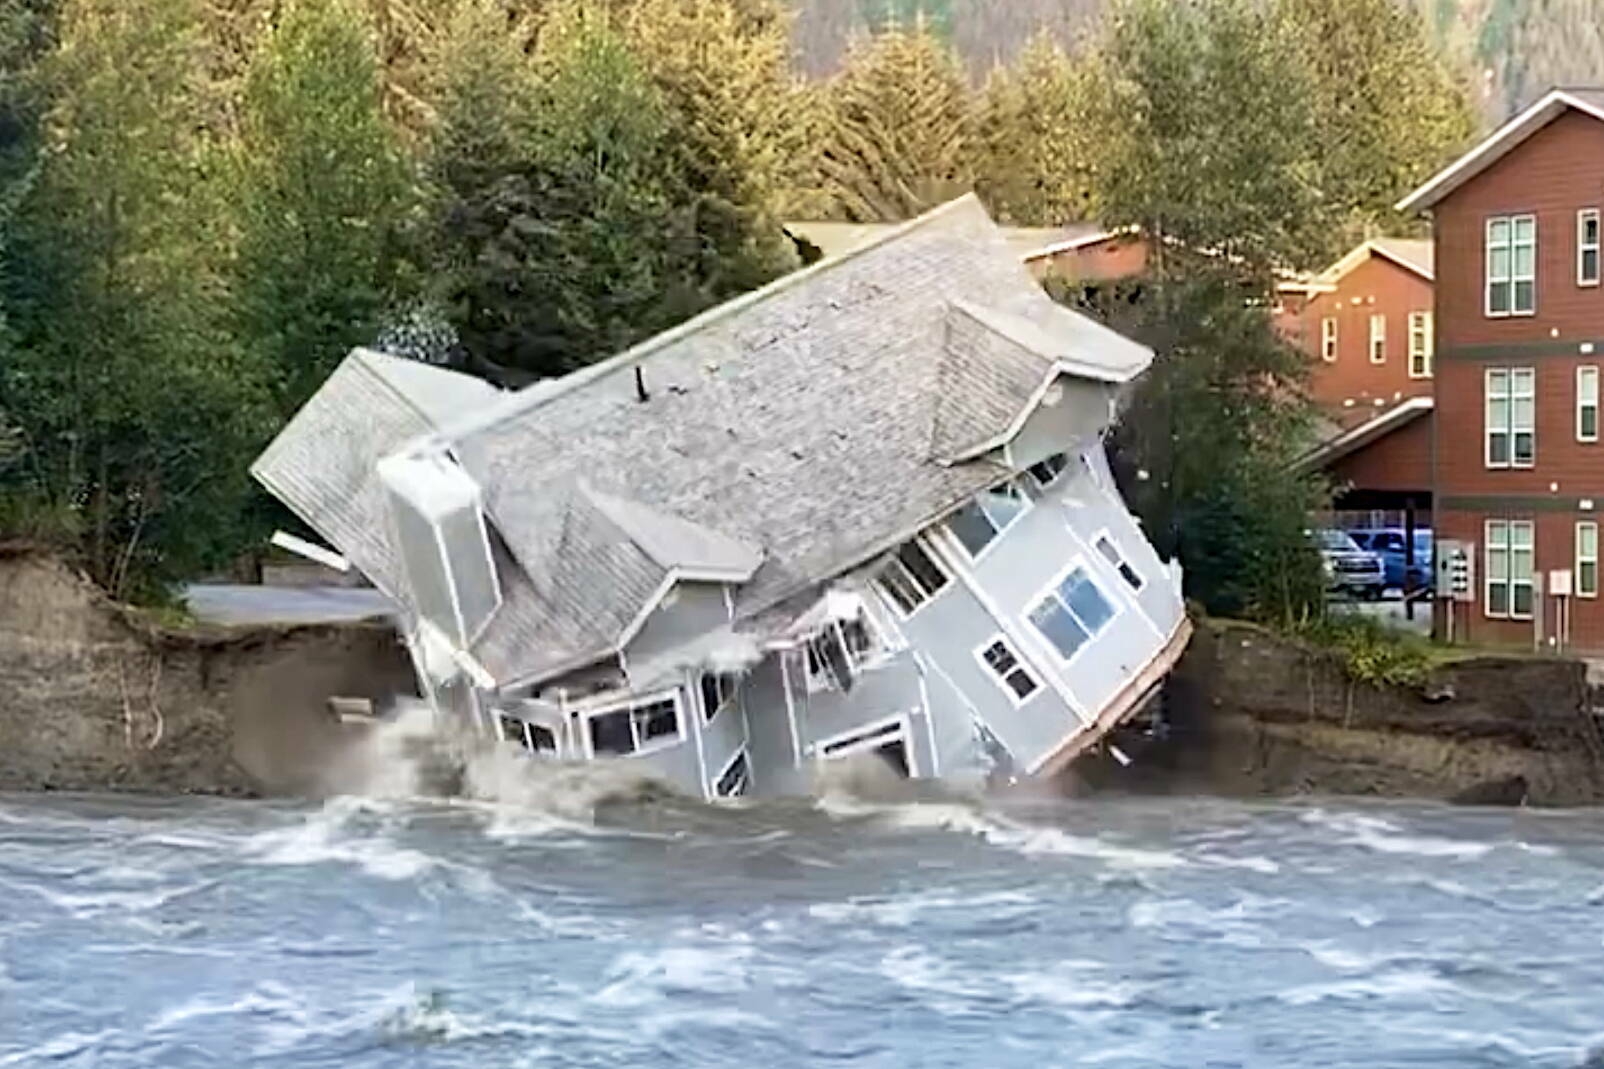 A home collapses into the Mendenhall River on Saturday, Aug. 5, due to a record amount of flooding from Suicide Basin since an annual cycle of water release began there in 2011. (Screenshot from video by Sam Nolan)